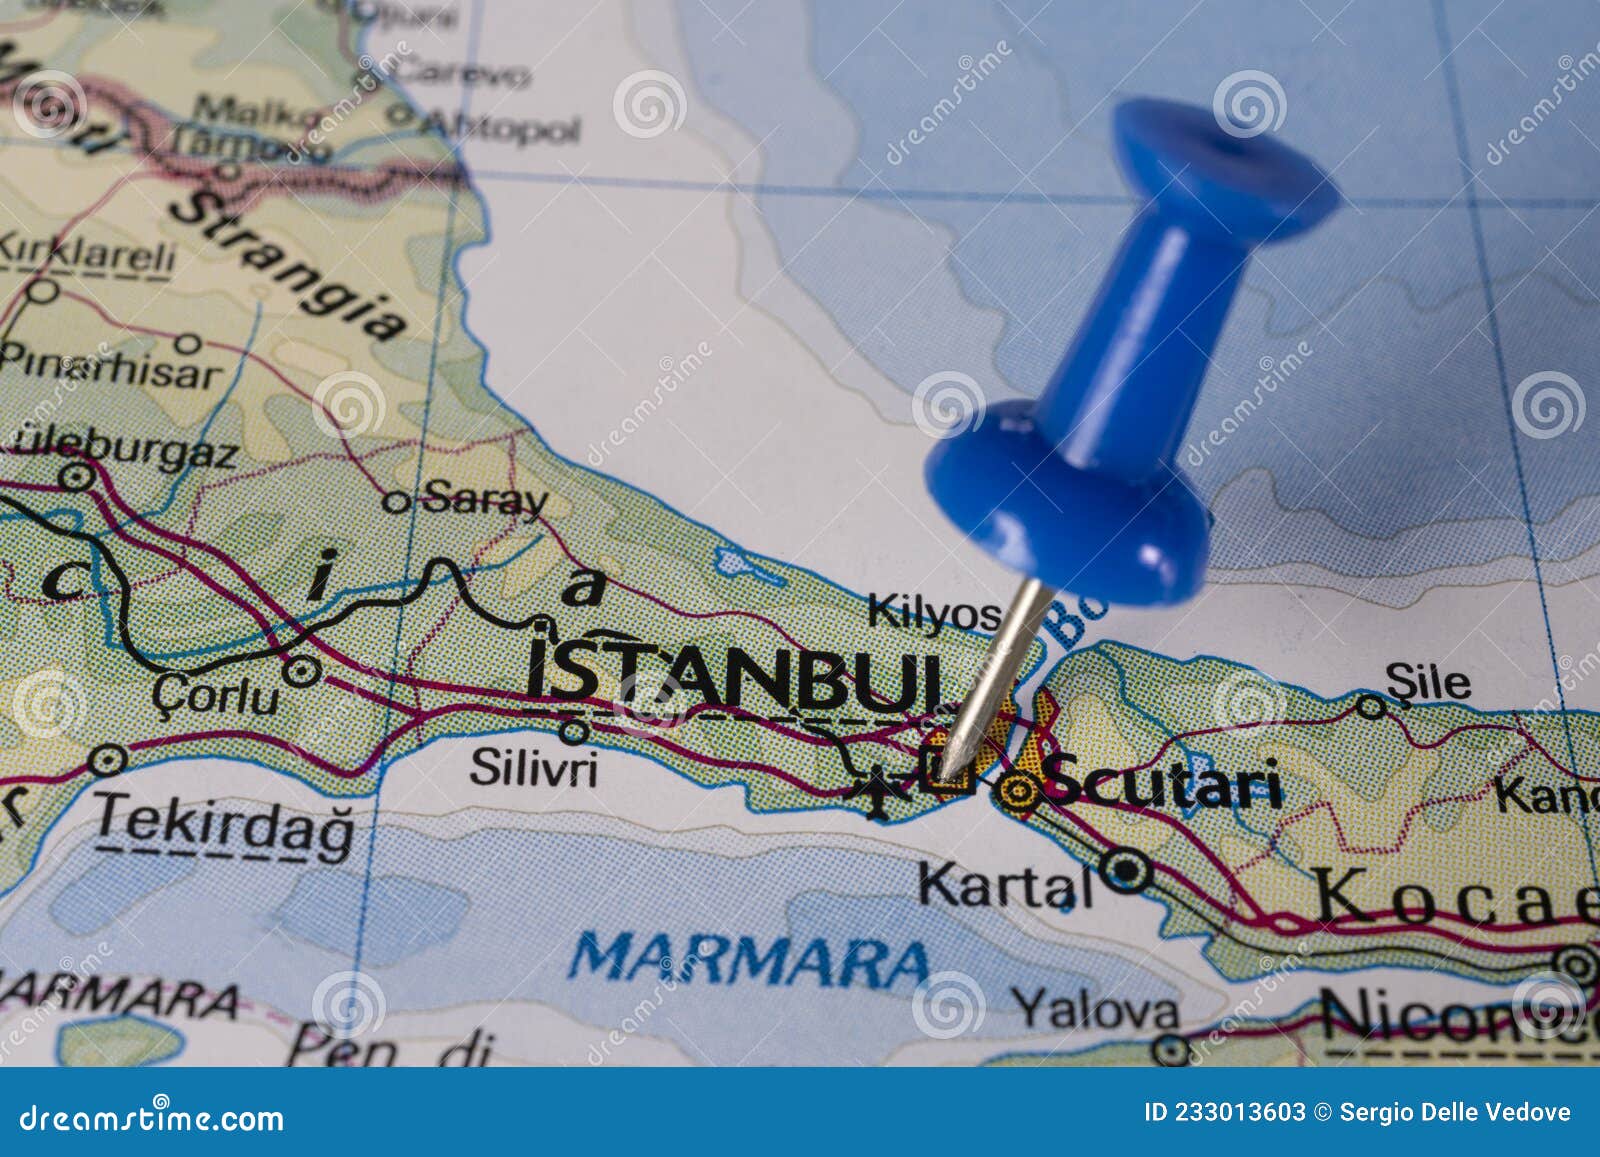 798 istanbul map photos free royalty free stock photos from dreamstime